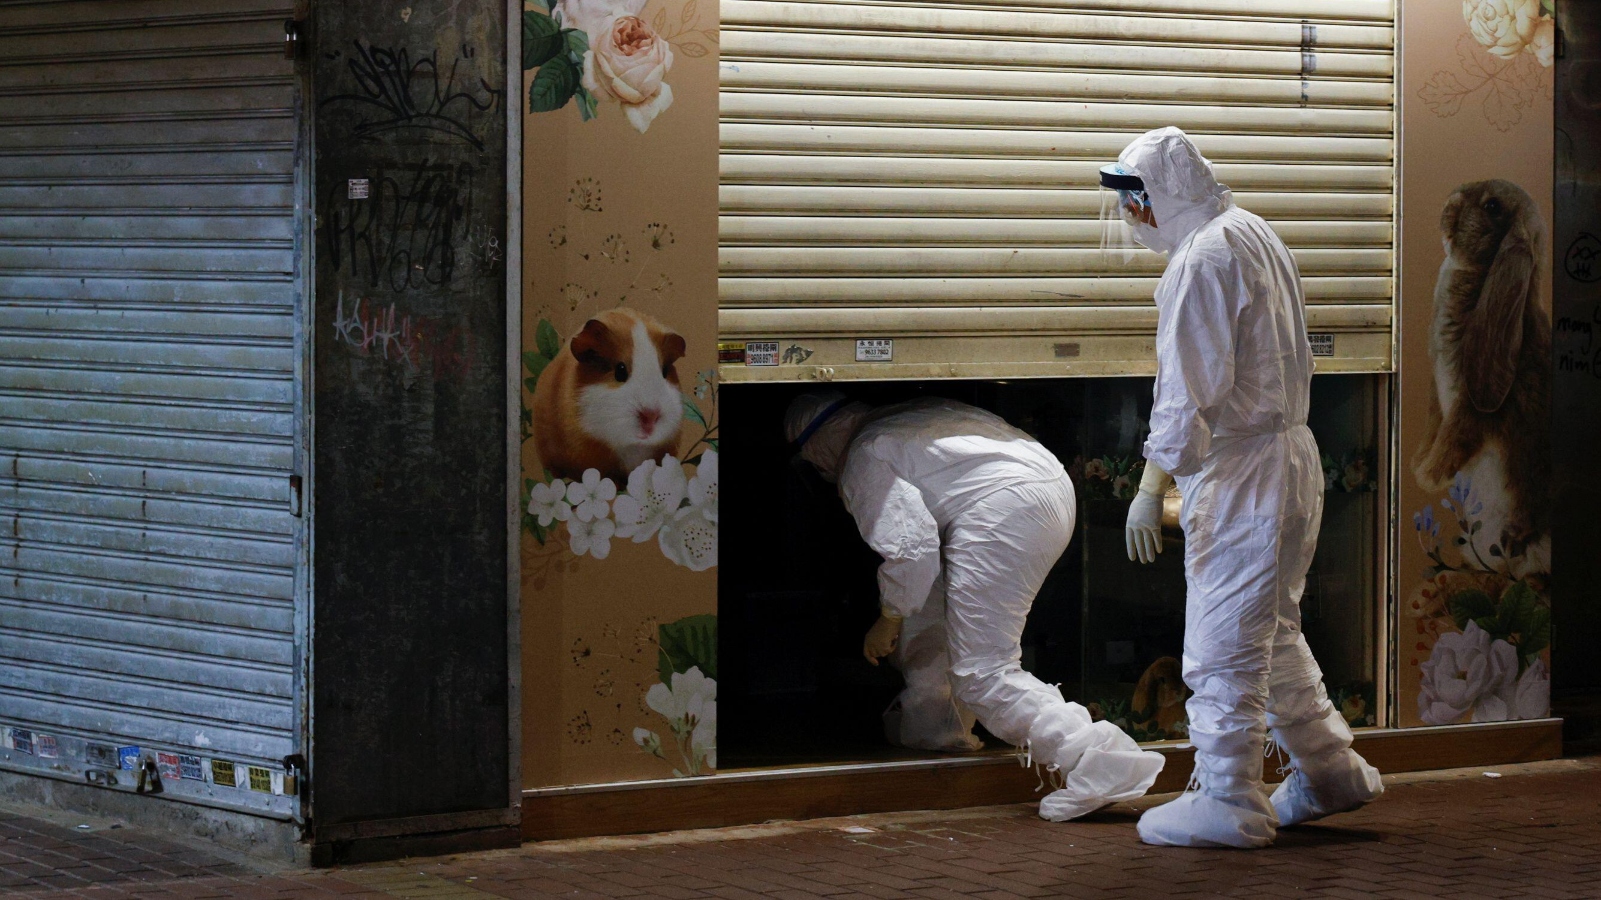 Thousands of hamsters will be killed in Hong Kong amid COVID-19 outbreak